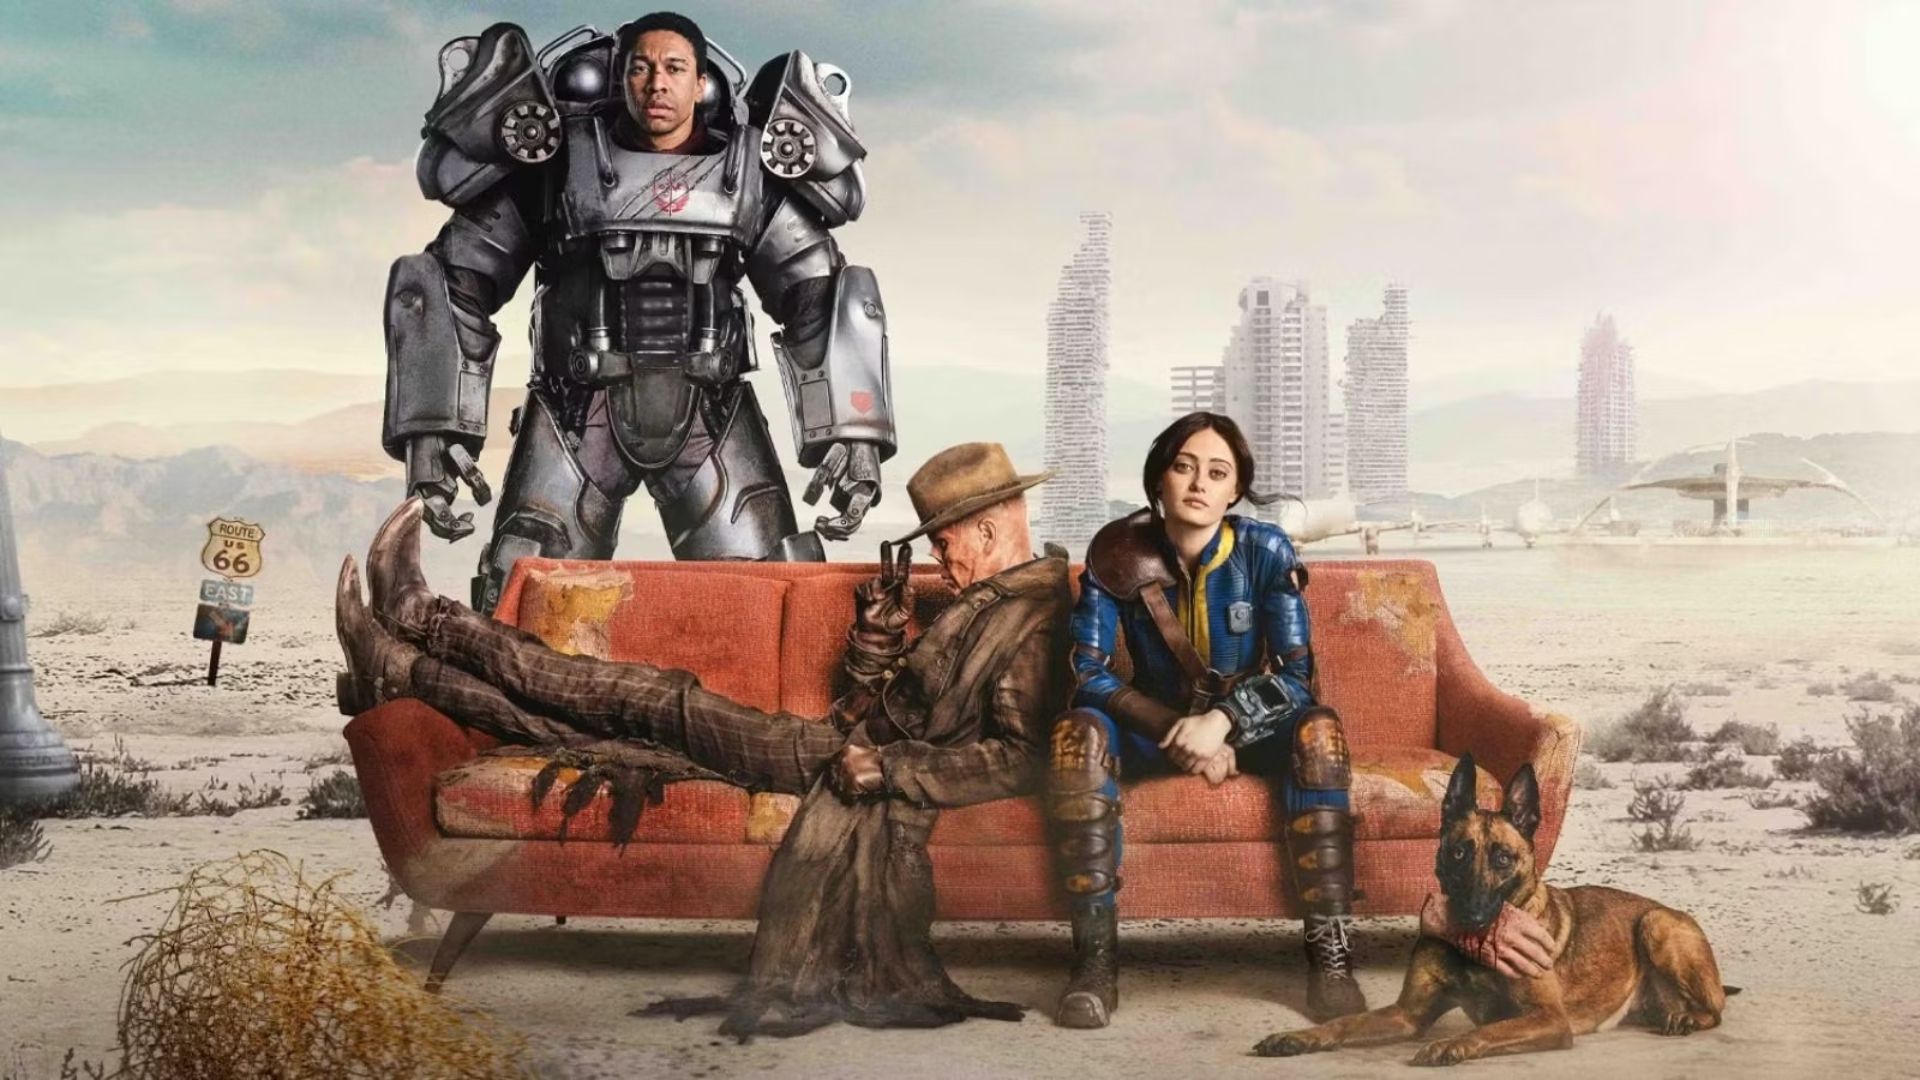 Ella Purnell, Walton Goggins, and Aaron Clifton Moten sitting on a couch in the wasteland in Fallout